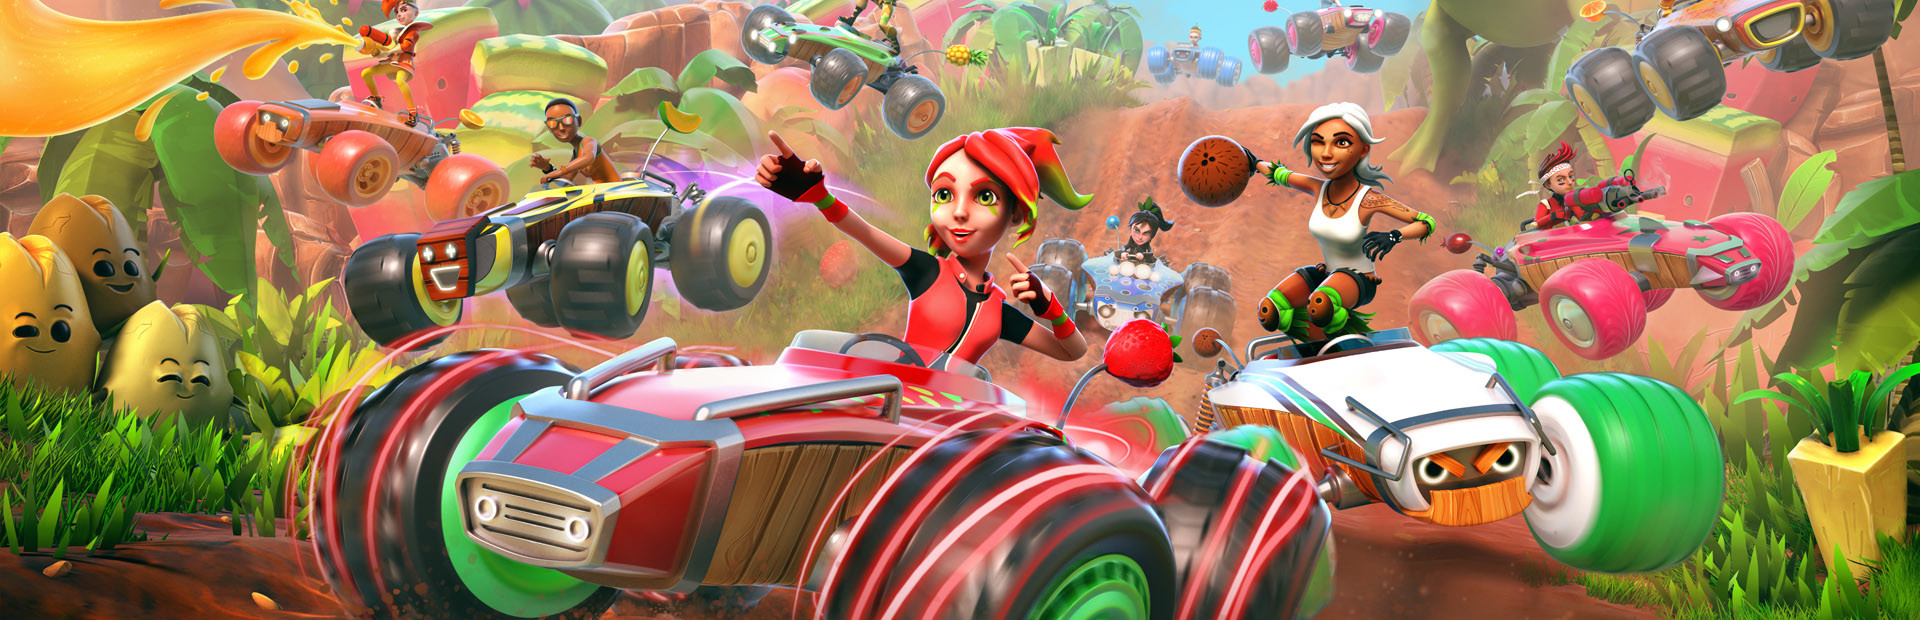 All-Star Fruit Racing cover image